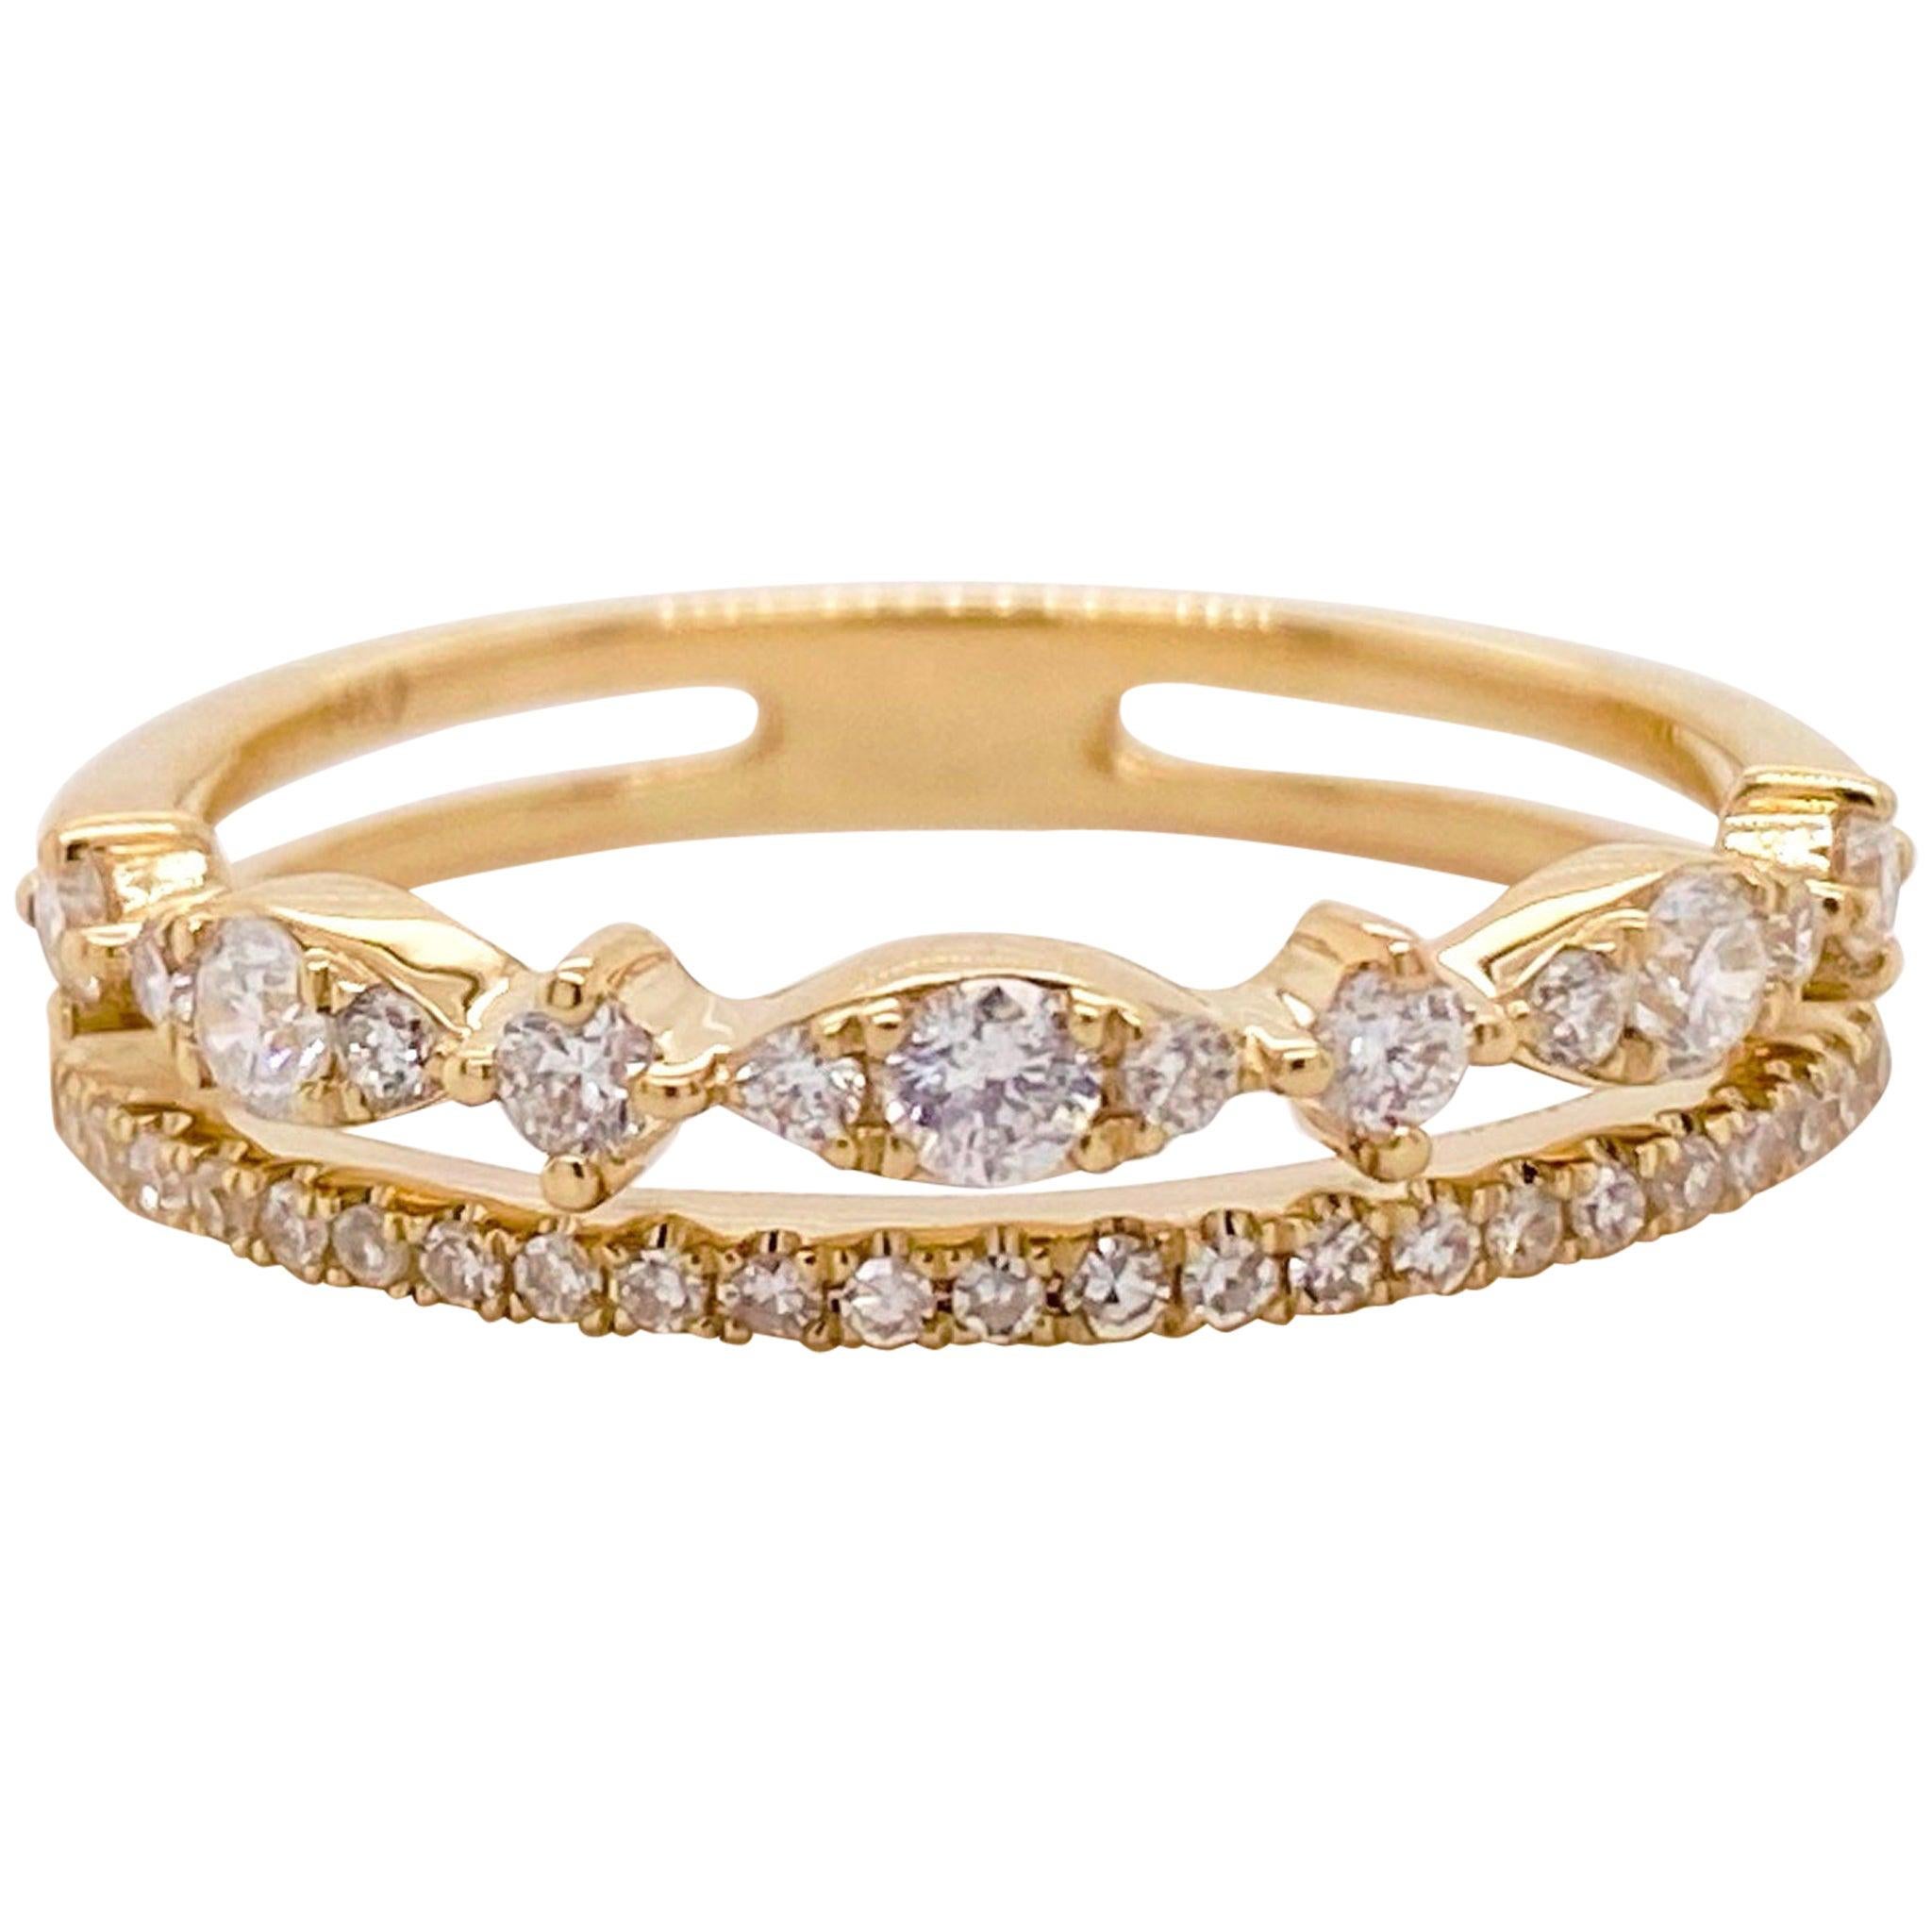 For Sale:  Diamond Duet Ring, 14 Karat Gold Diamond Double Band Ring, Stackable Ring